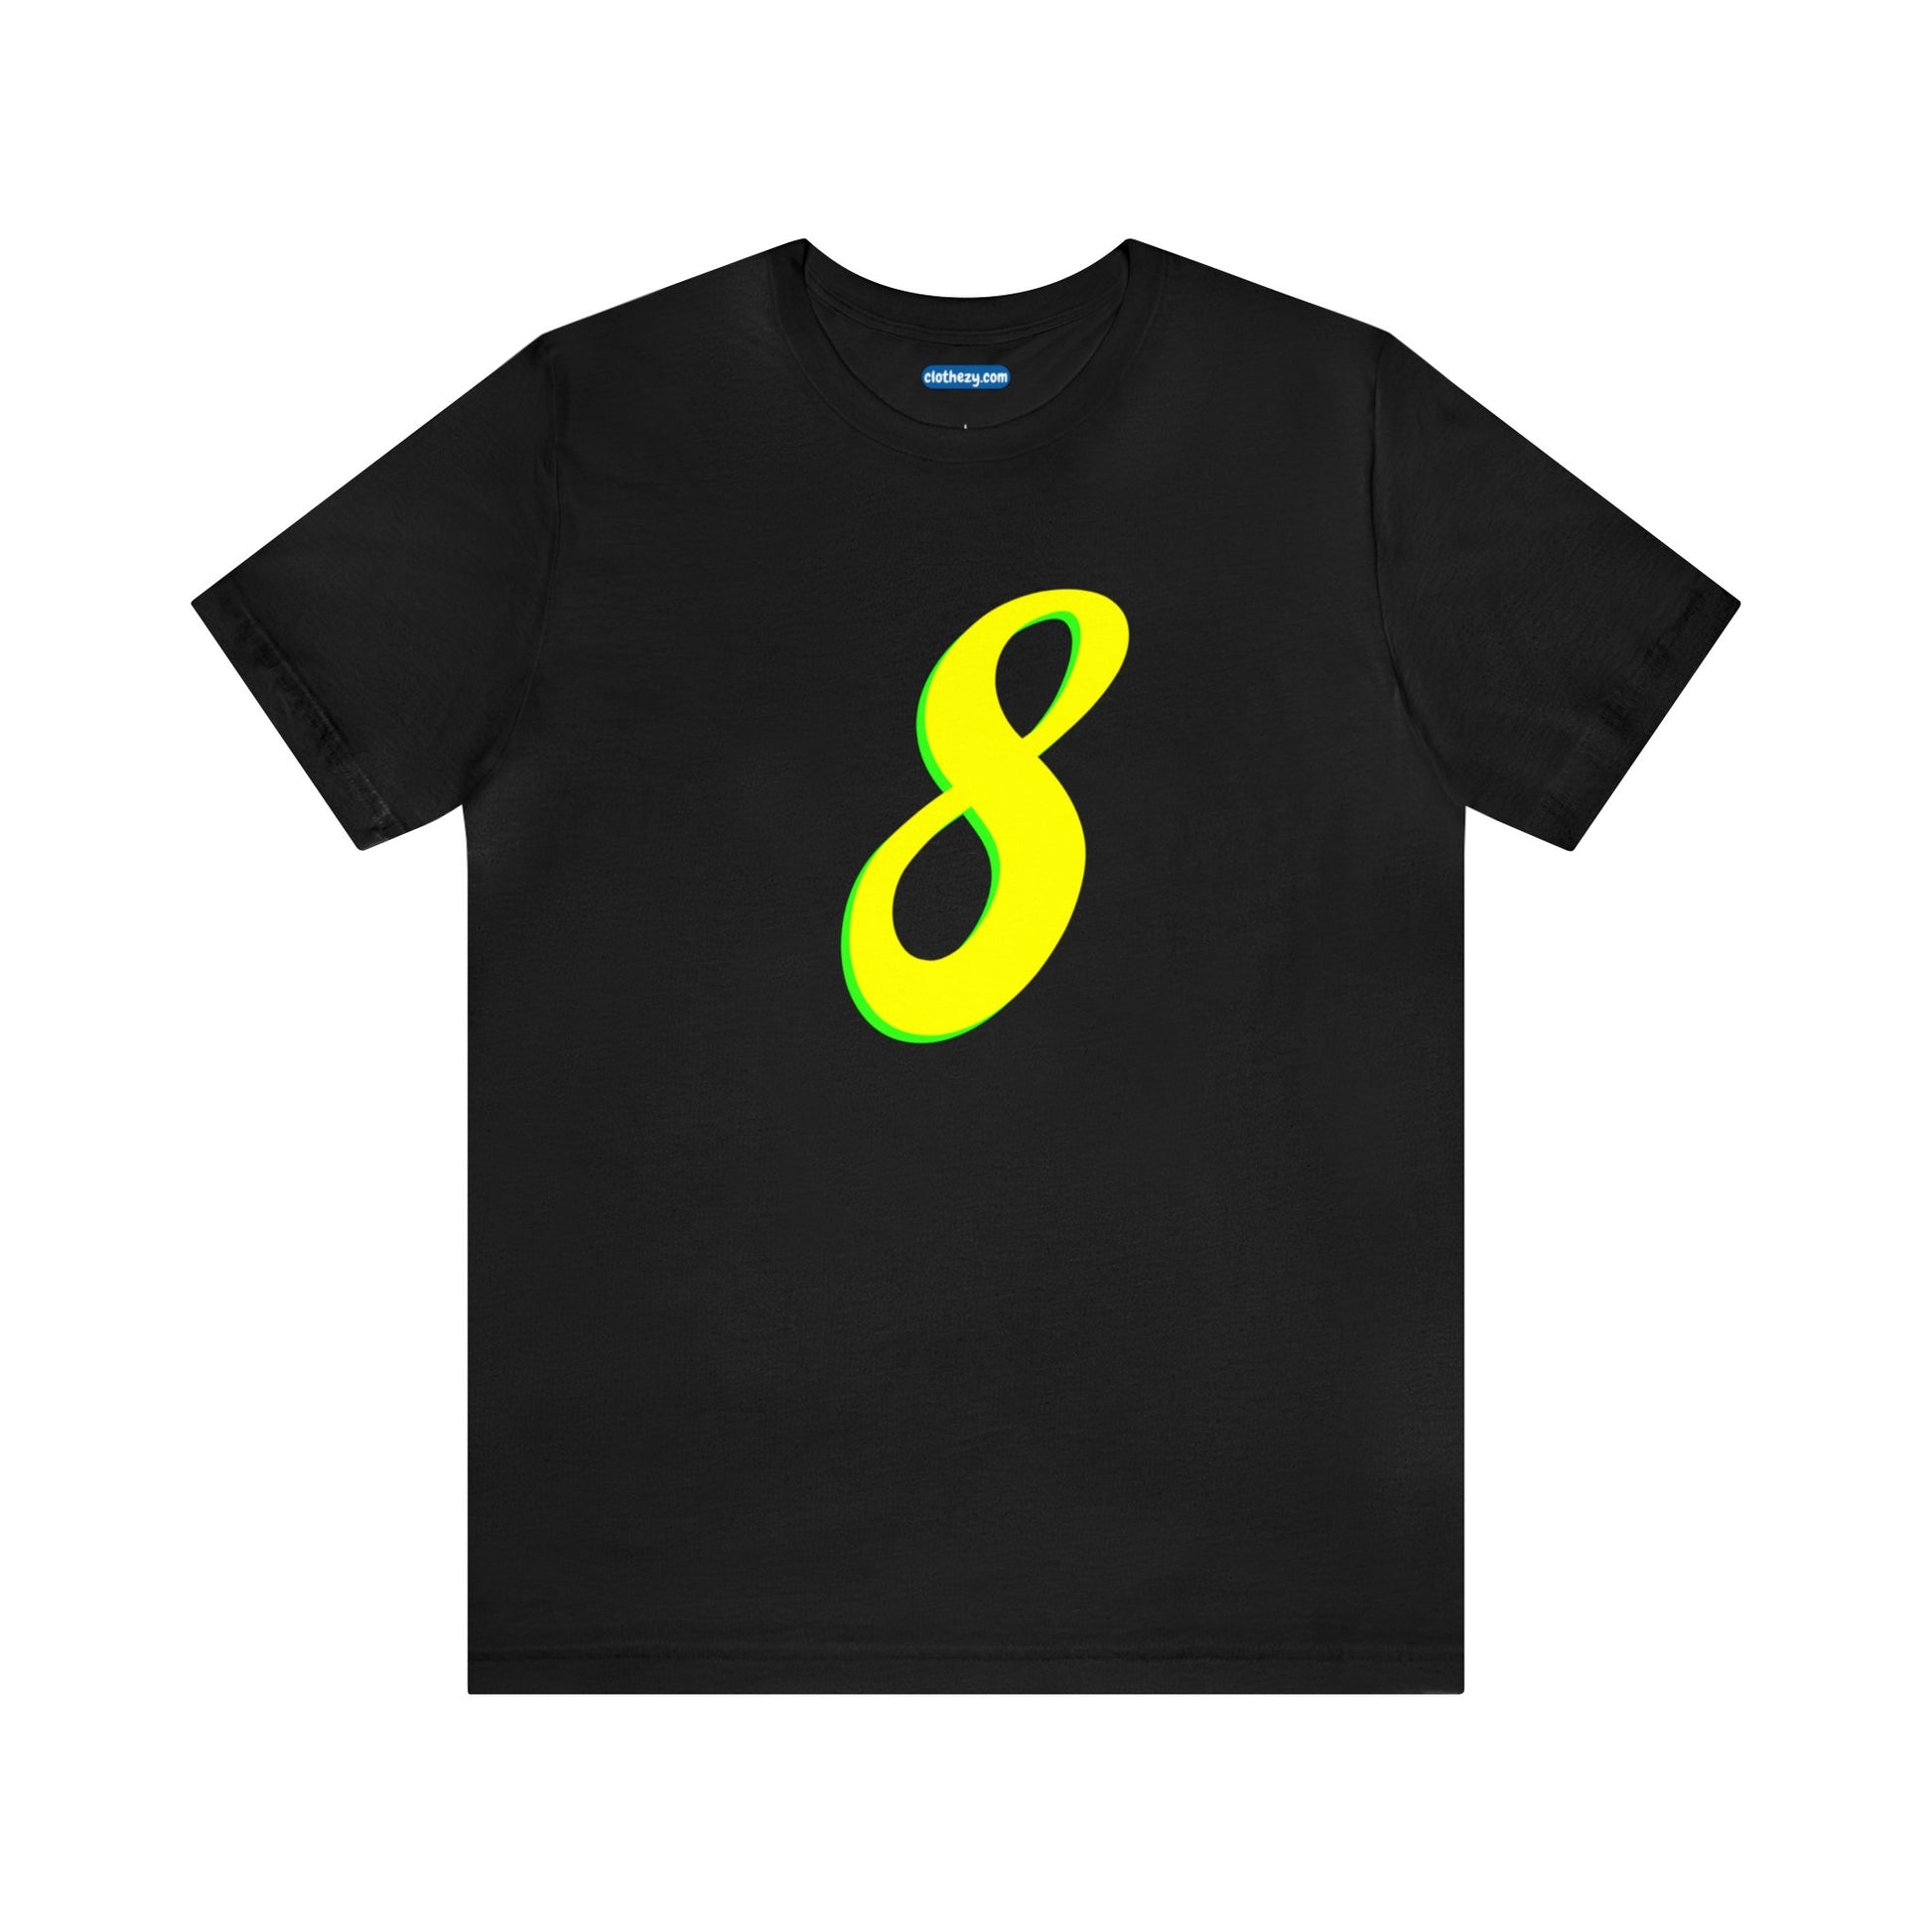 Number 8 Design - Soft Cotton Tee for birthdays and celebrations, Gift for friends and family, Multiple Options by clothezy.com in Dark Grey Heather Size Small - Buy Now